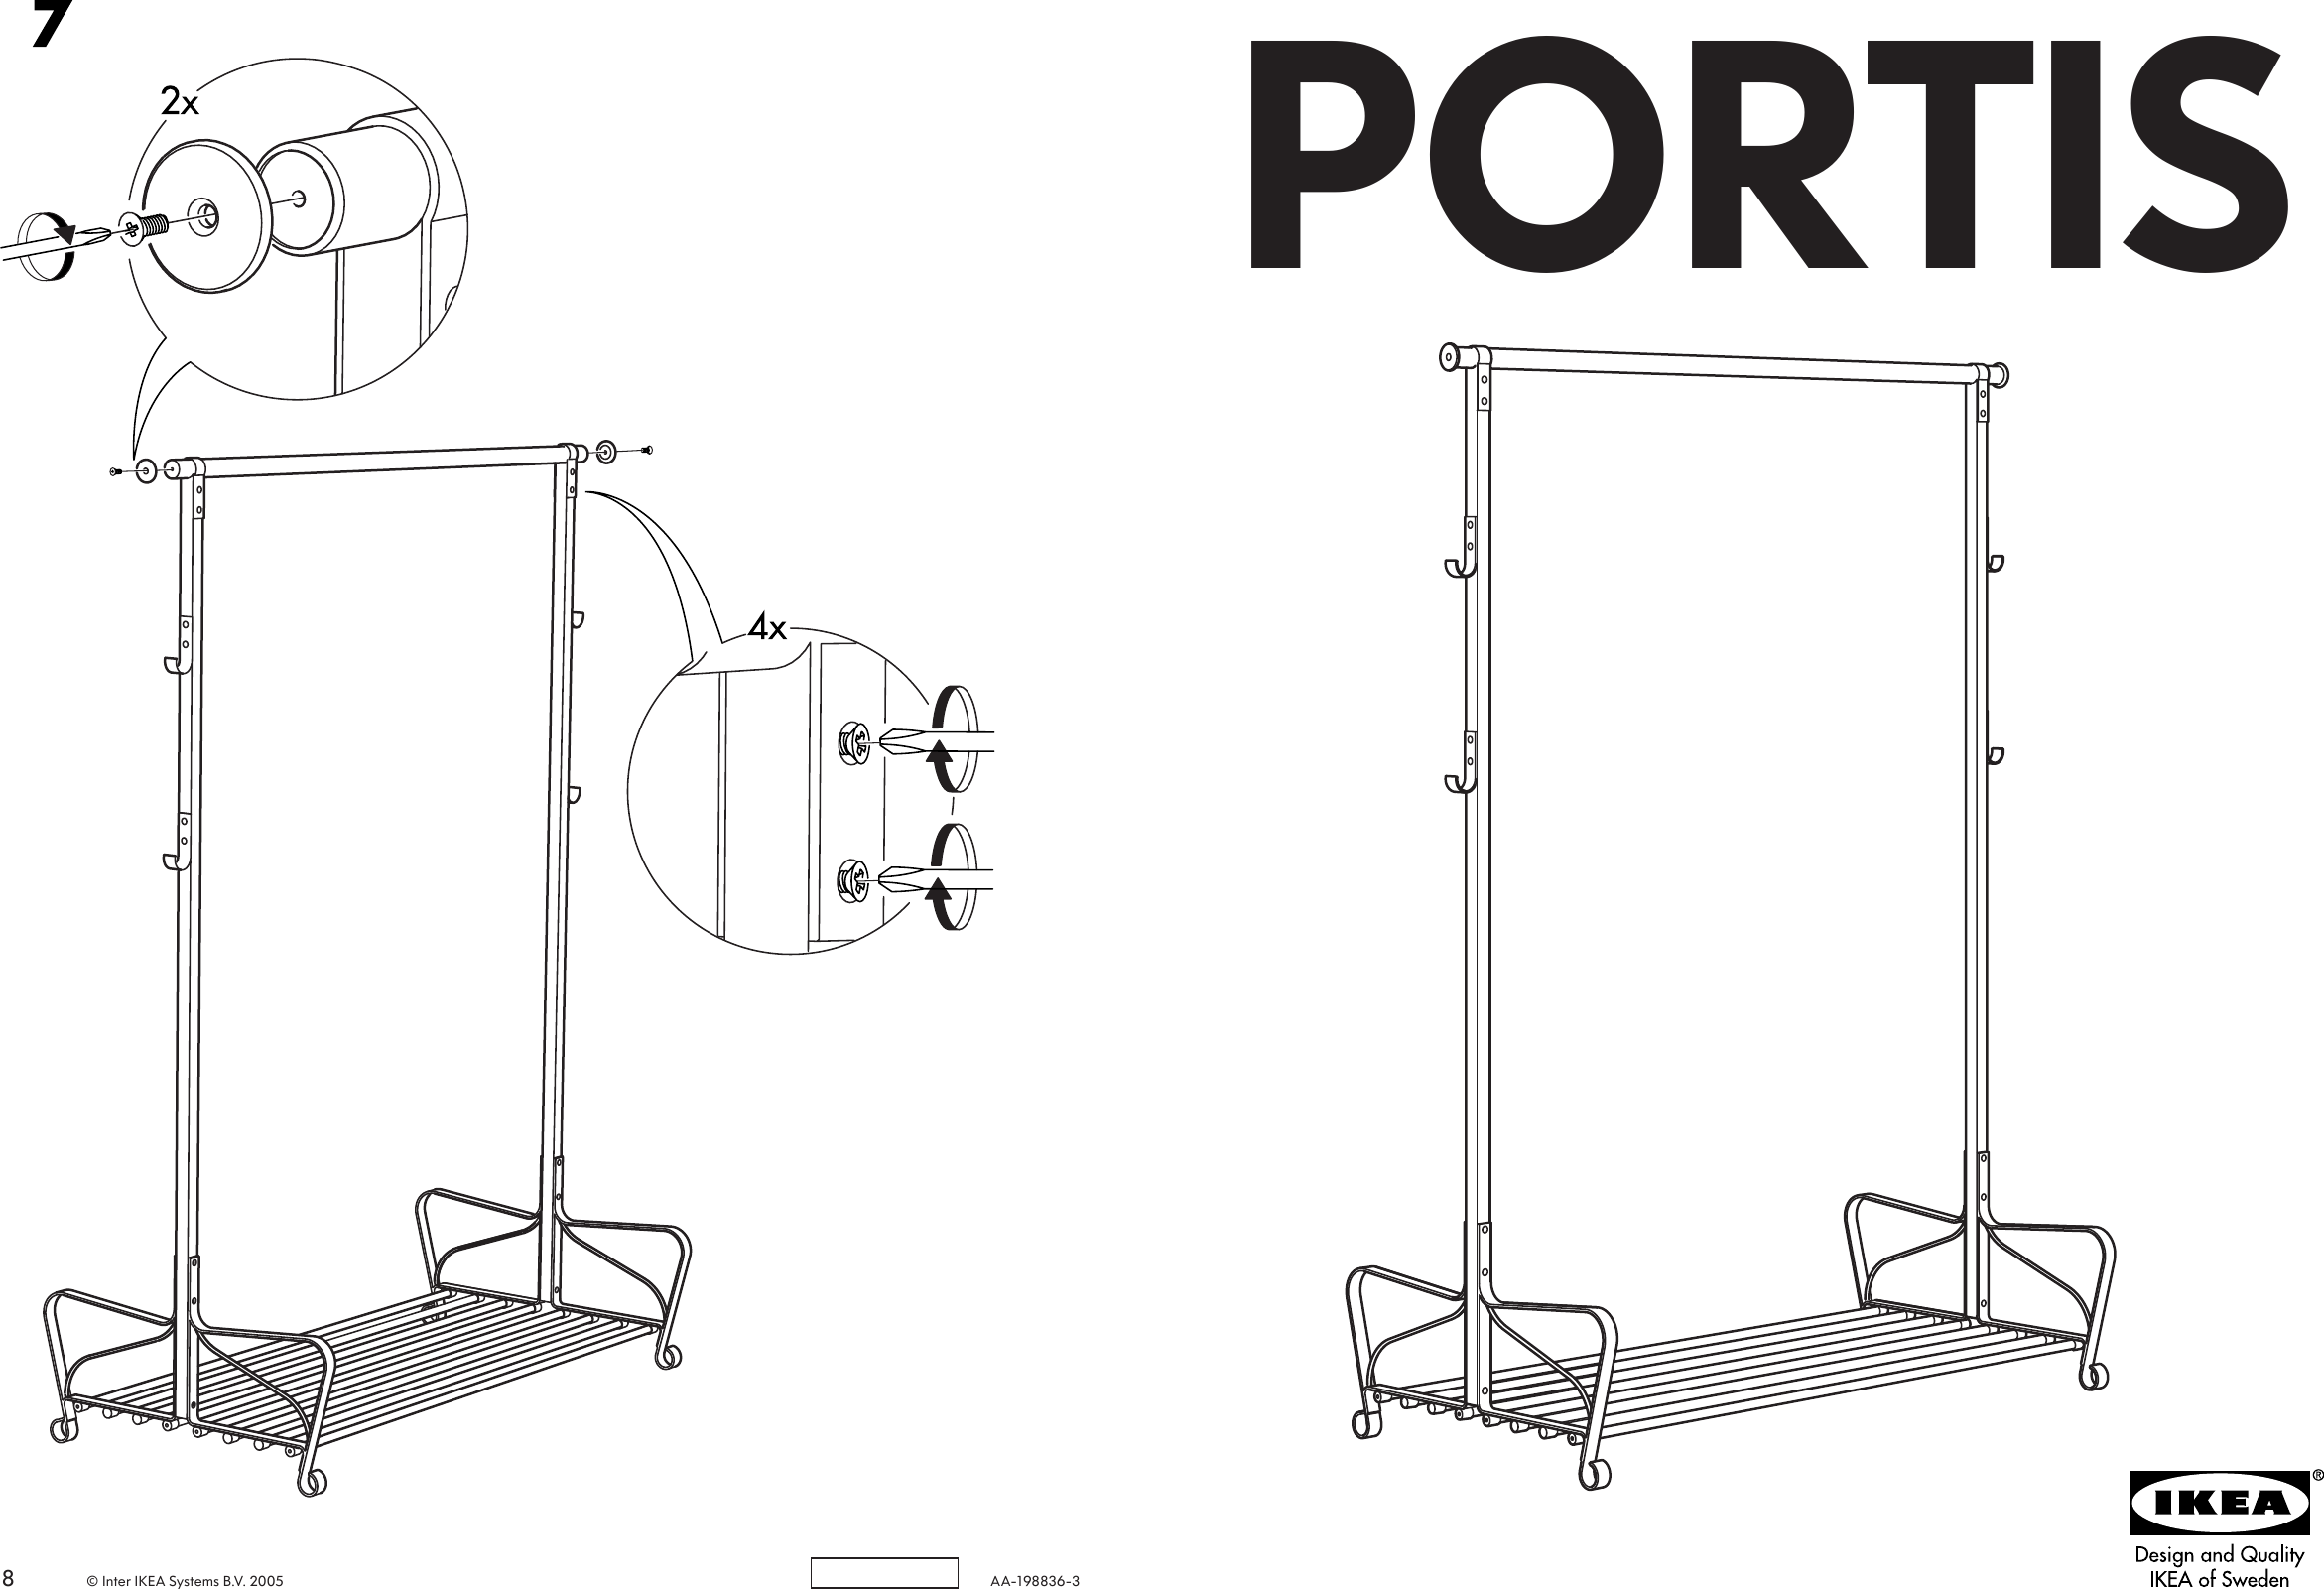 Page 1 of 4 - Ikea Ikea-Portis-Clothes-Rack-Assembly-Instruction